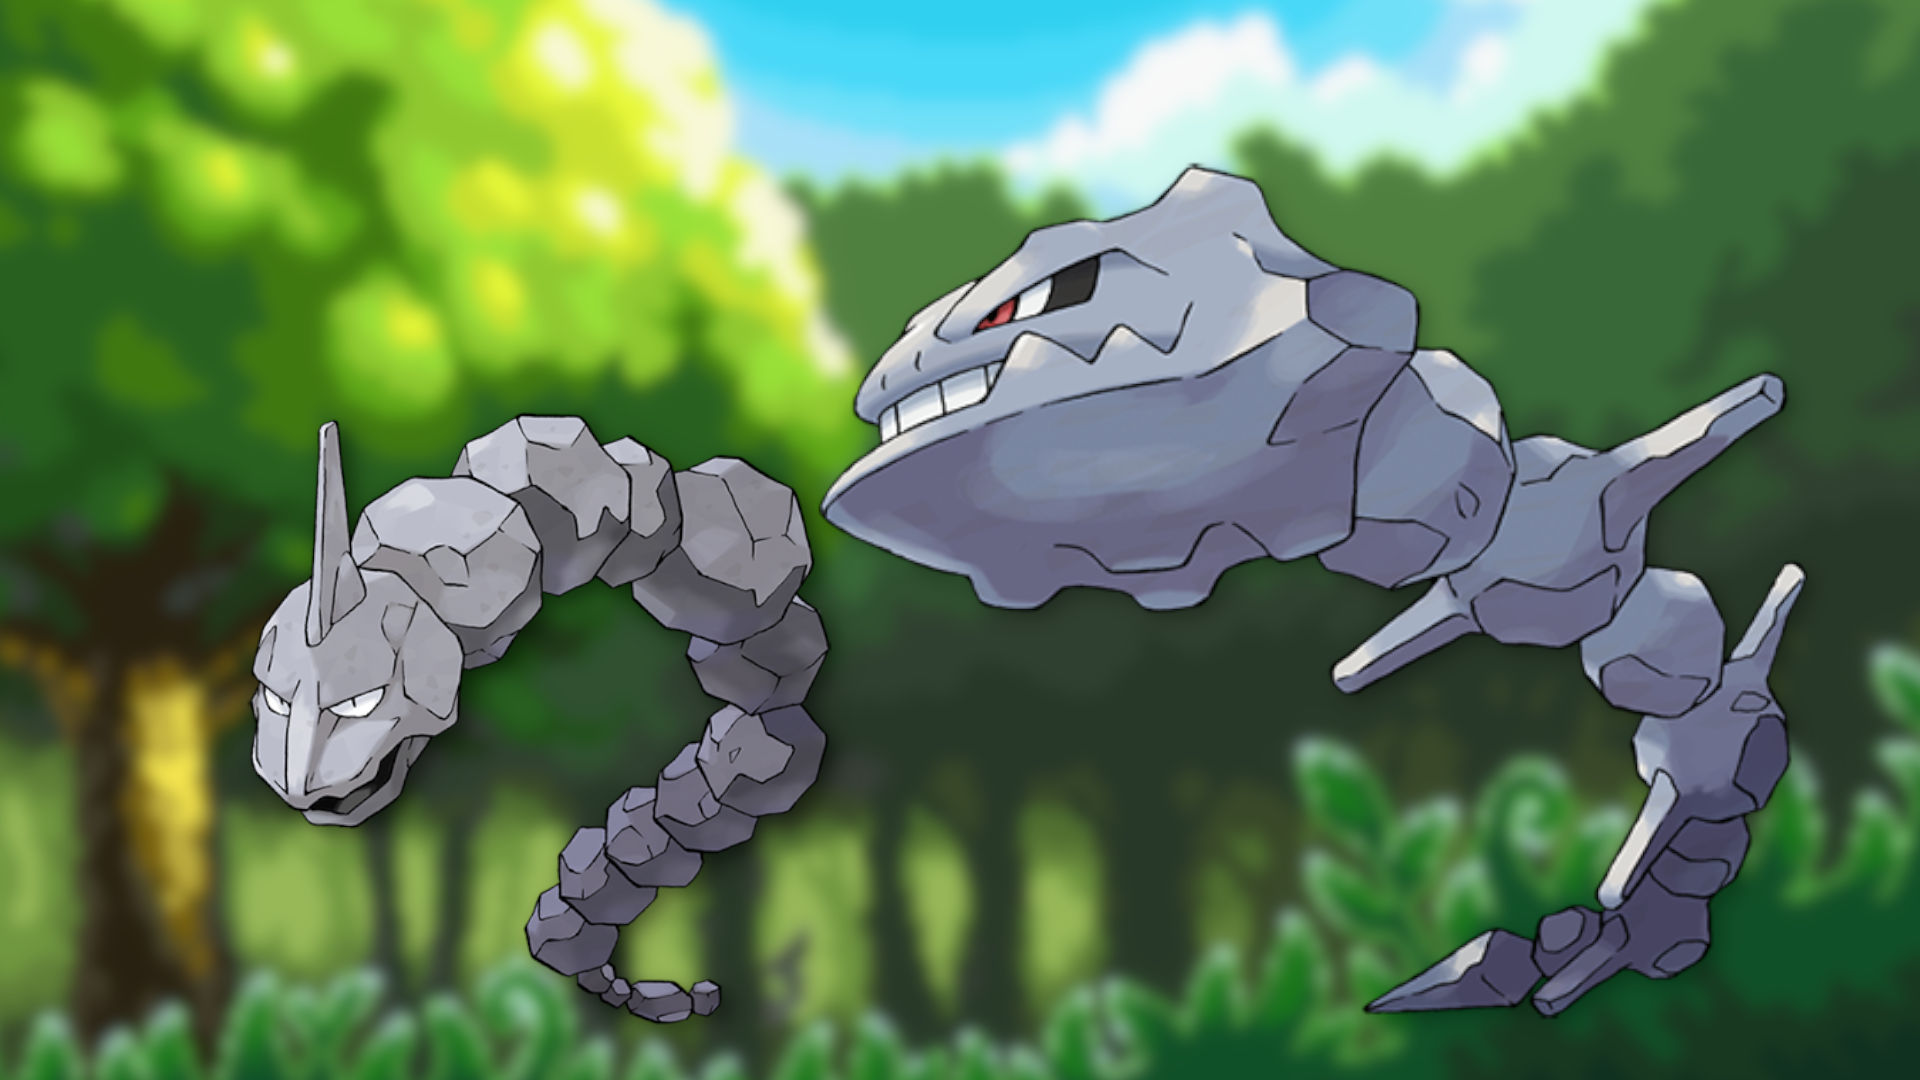 Custom image of Steelix and Onix in a field for snake Pokémon guide